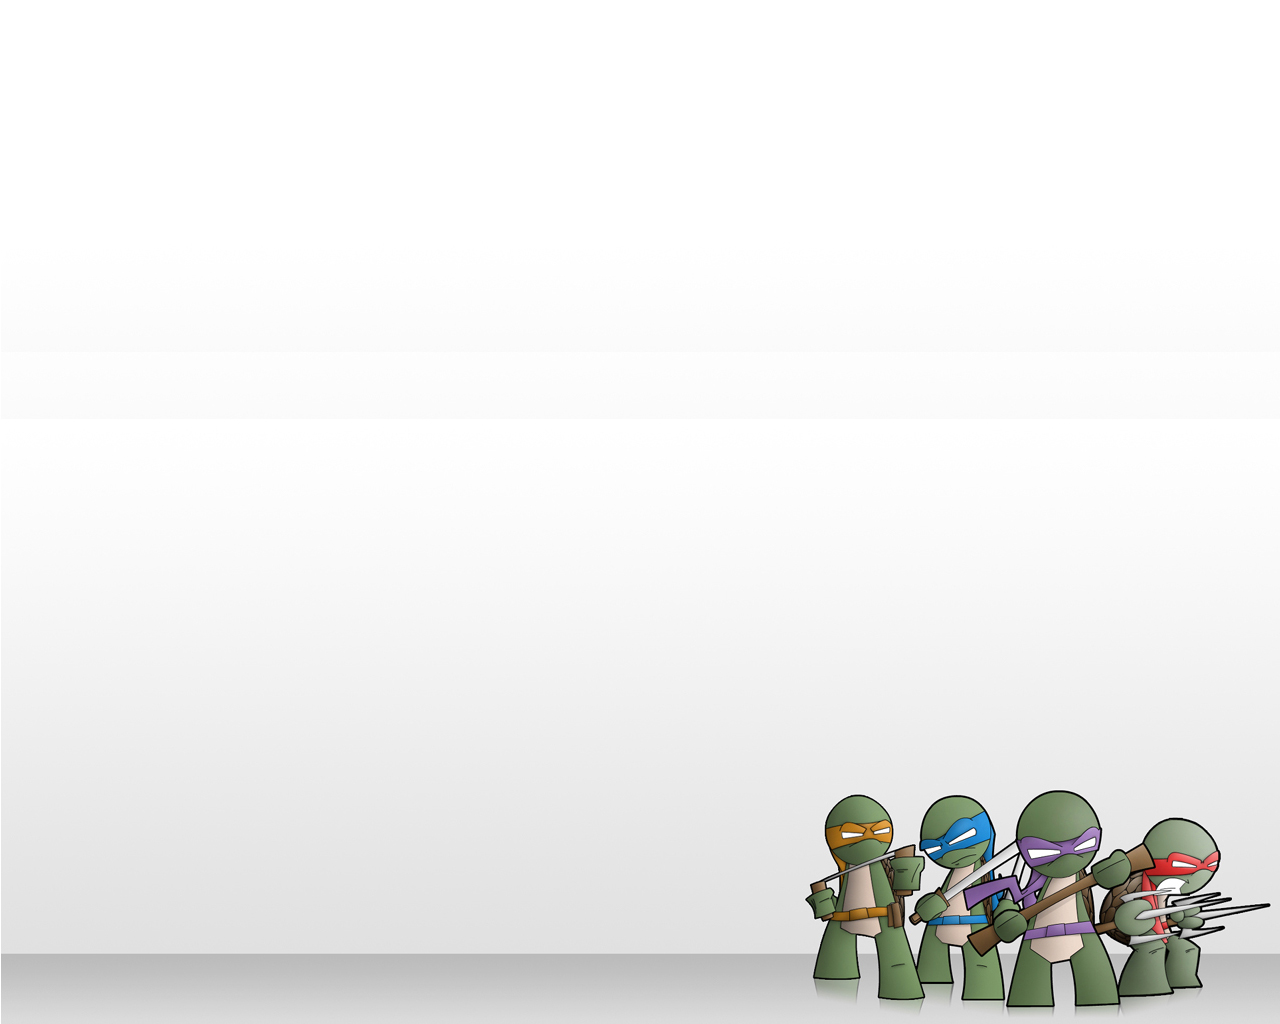 This Is The Ninja Turtles Background Image You Can Use Powerpoint